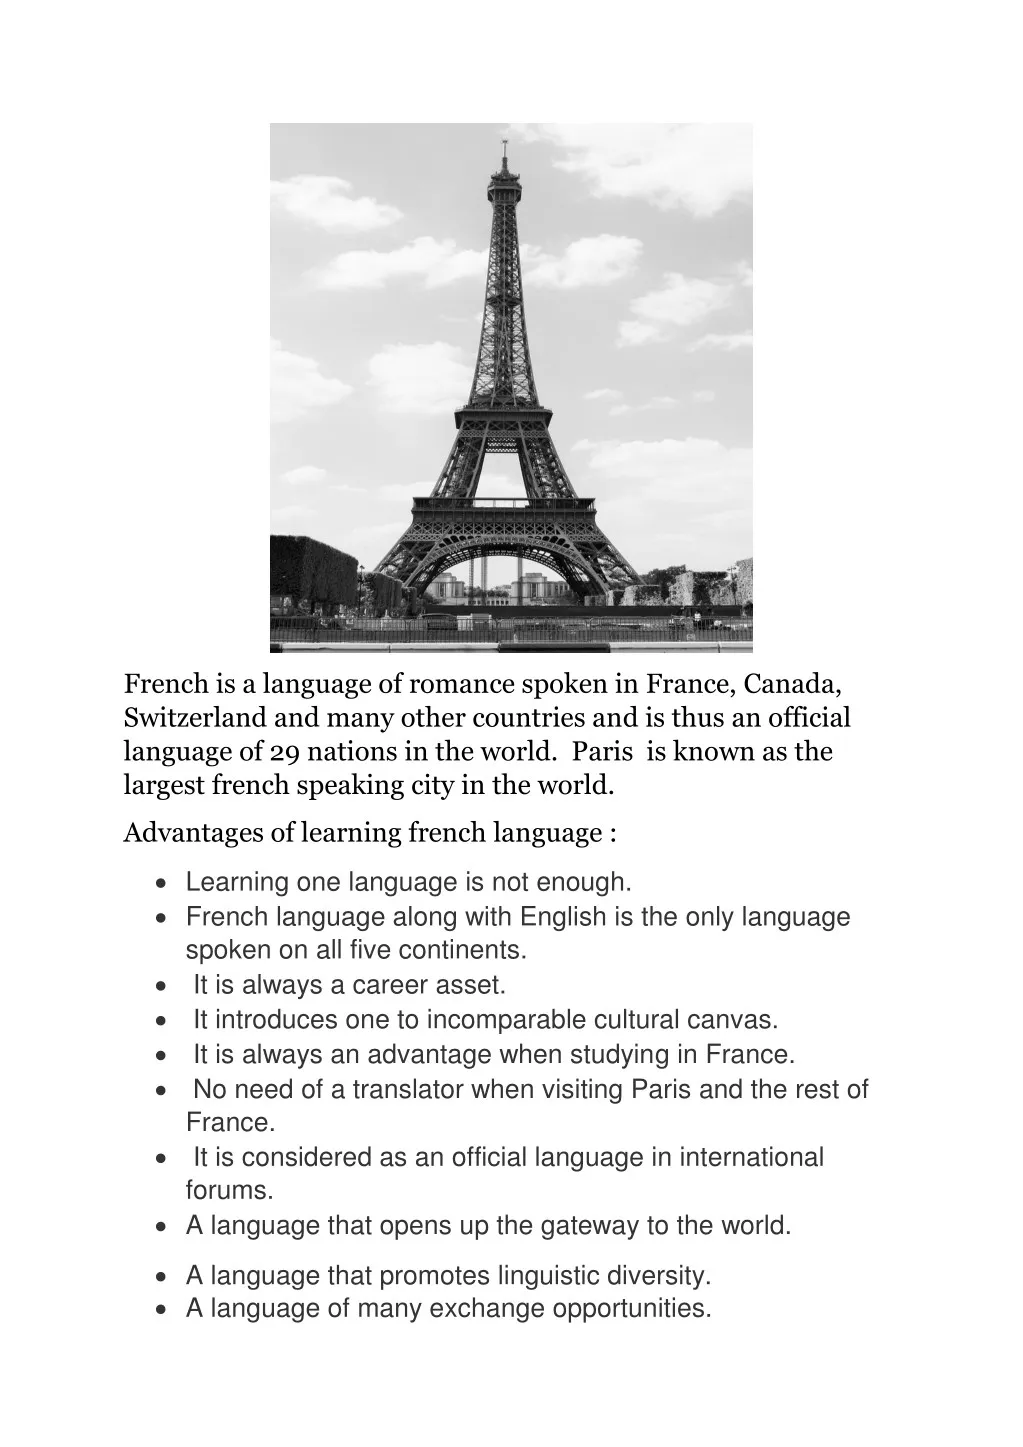 french is a language of romance spoken in france